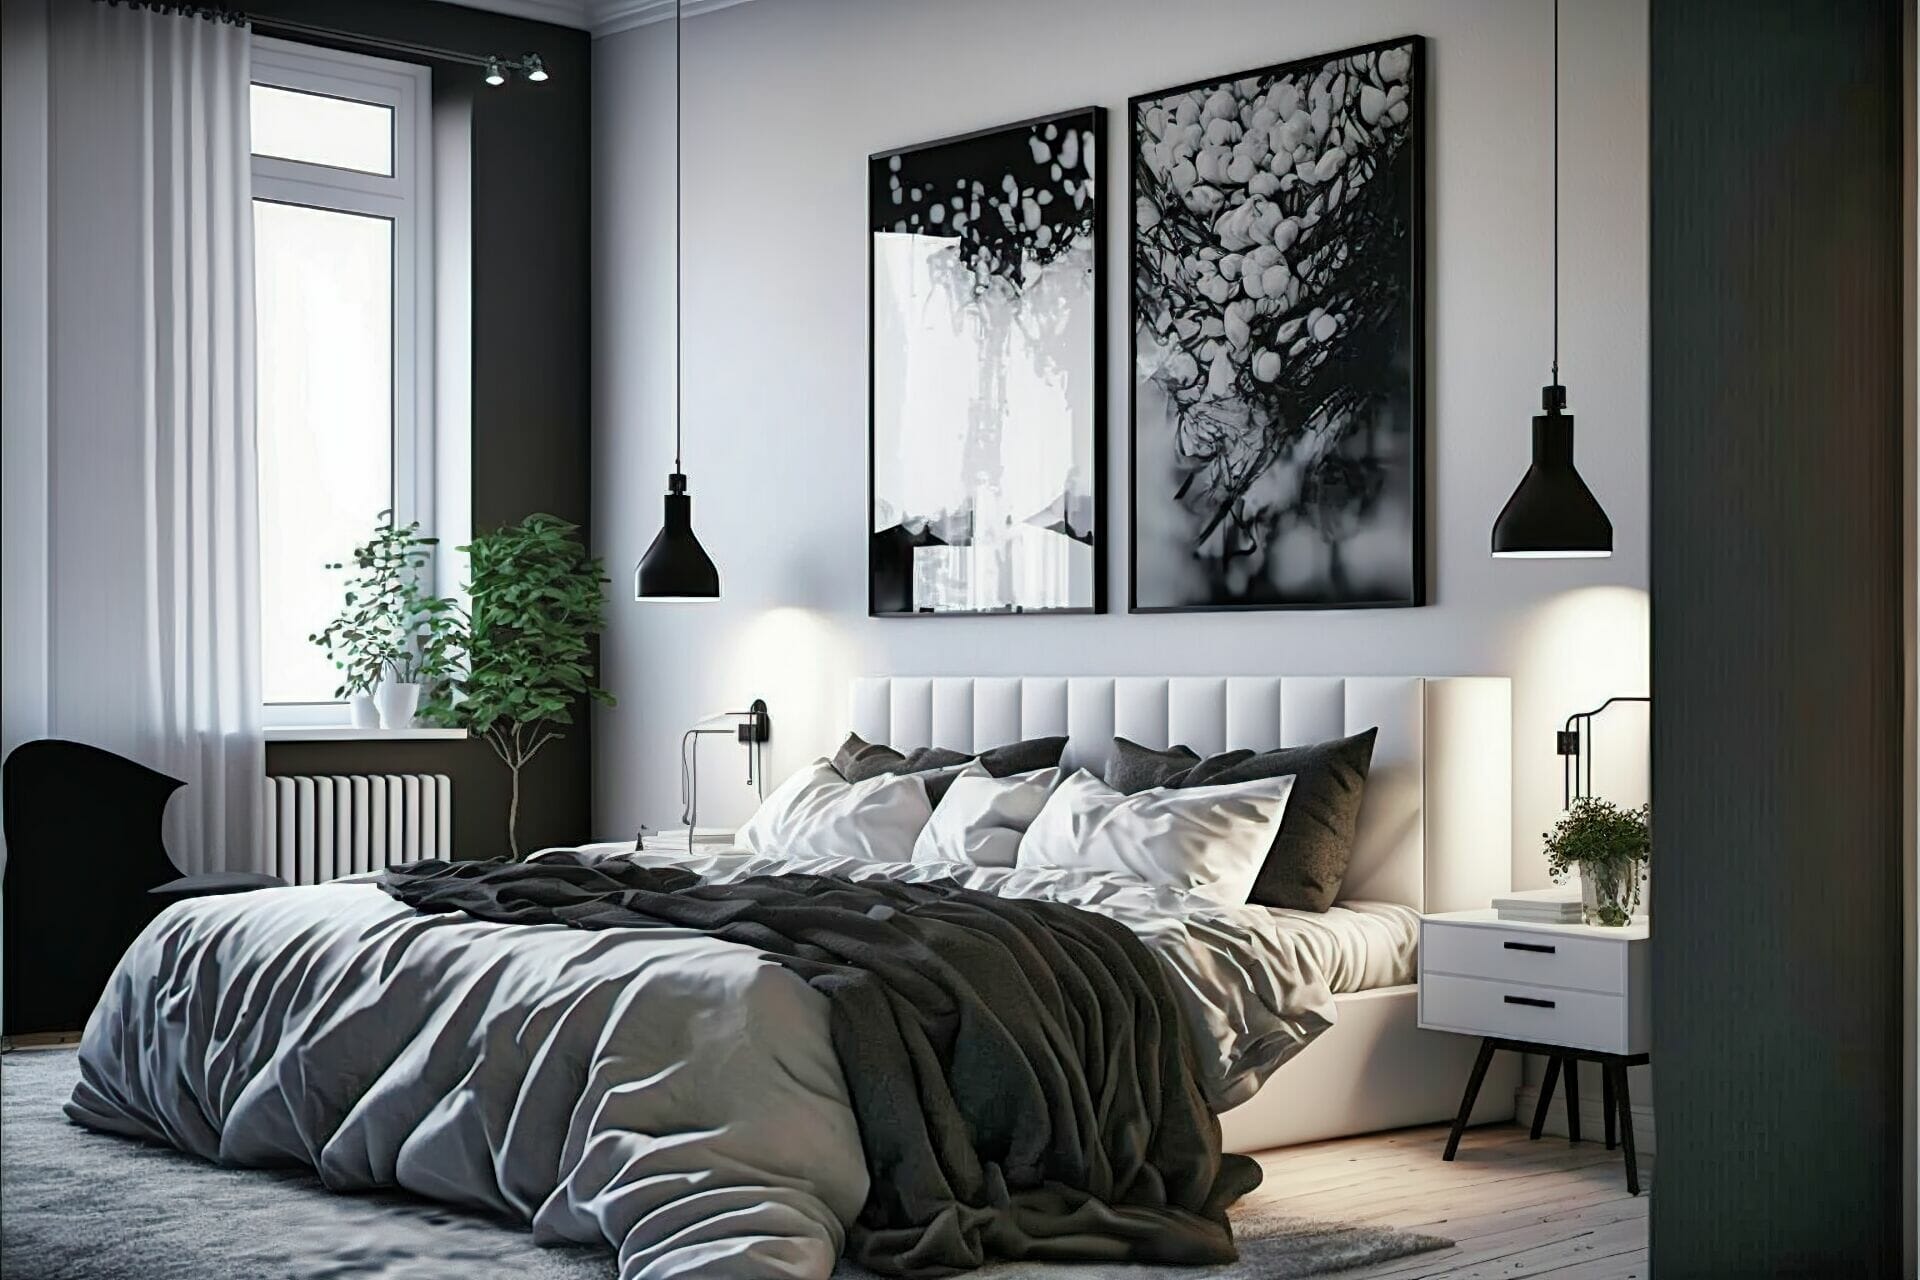 A Scandinavian Style Bedroom With Black And White Accents – This Elegant And Modern Bedroom Design Is Sure To Give You A Sense Of Sophistication. The Black And White Accents, Such As The Bed Frame And The Nightstand, Create A Sleek And Polished Look.